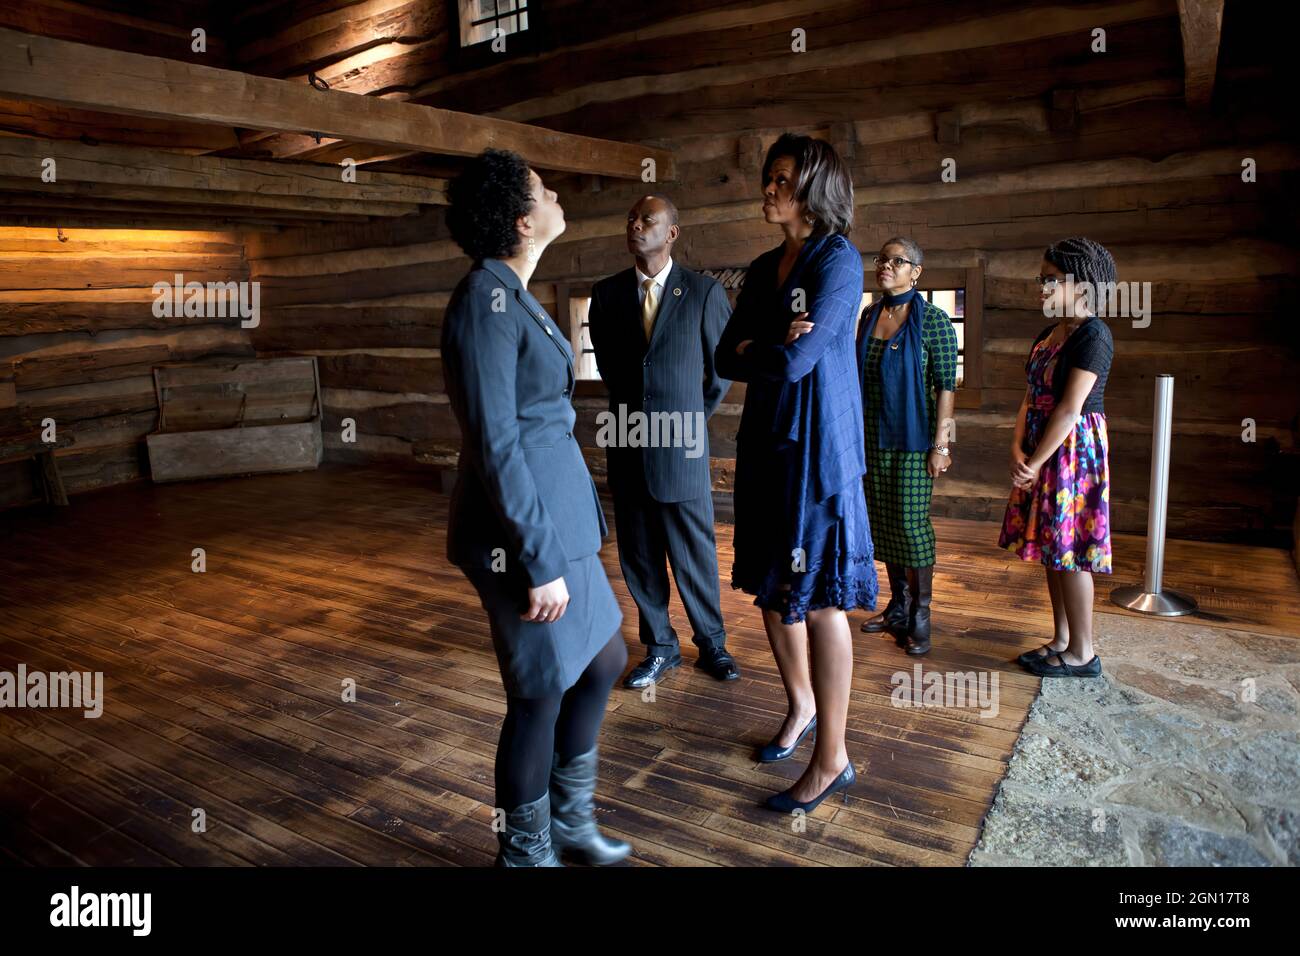 First Lady Michelle Obama views The Slave Pen exhibit while touring the National Underground Railroad Freedom Center in Cincinnati, Ohio, Feb. 23, 2012. Pictured, from left, are: Dina Bailey, Associate Curator of the National Underground Railroad Freedom Center; Cincinnati Mayor Mark Mallory; Verna Williams; and Allison Singleton. (Official White House Photo by Sonya N. Hebert) This official White House photograph is being made available only for publication by news organizations and/or for personal use printing by the subject(s) of the photograph. The photograph may not be manipulated in any Stock Photo